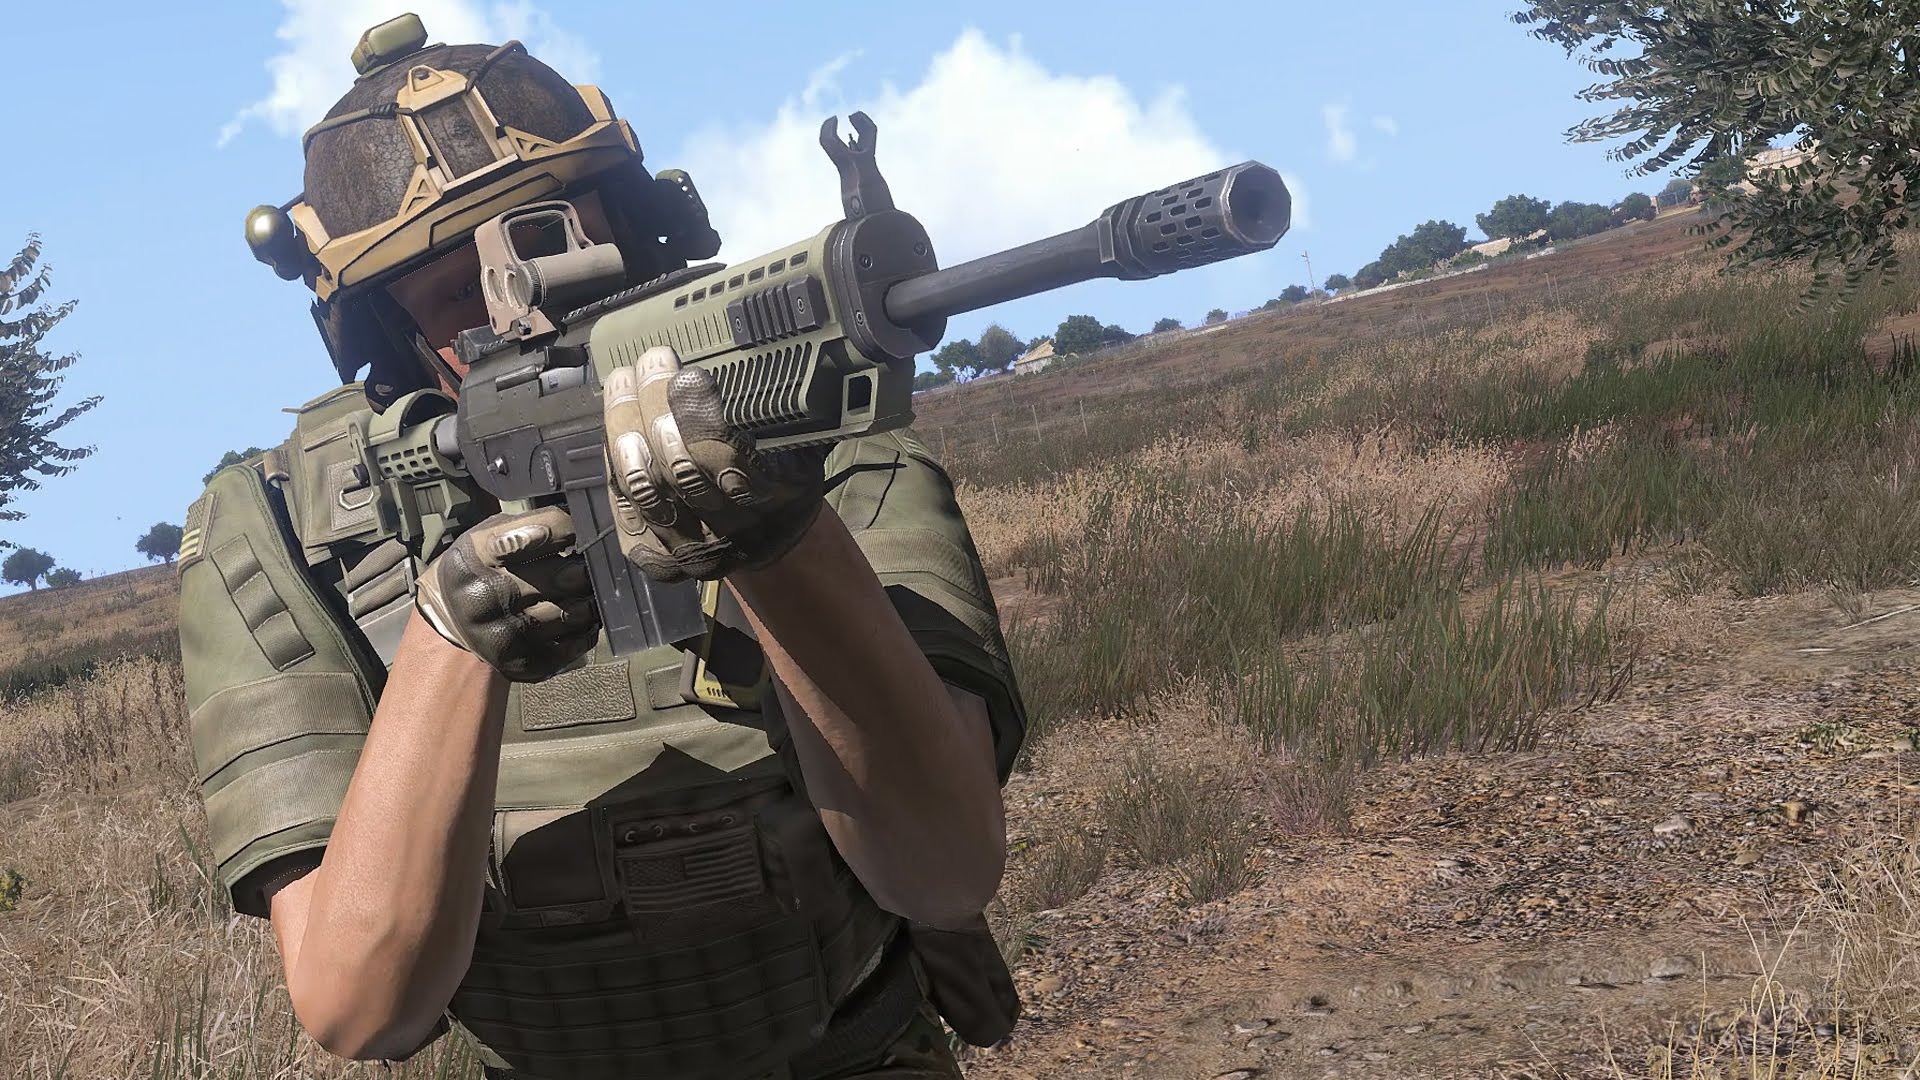 how to edit arma 3 workshop missions